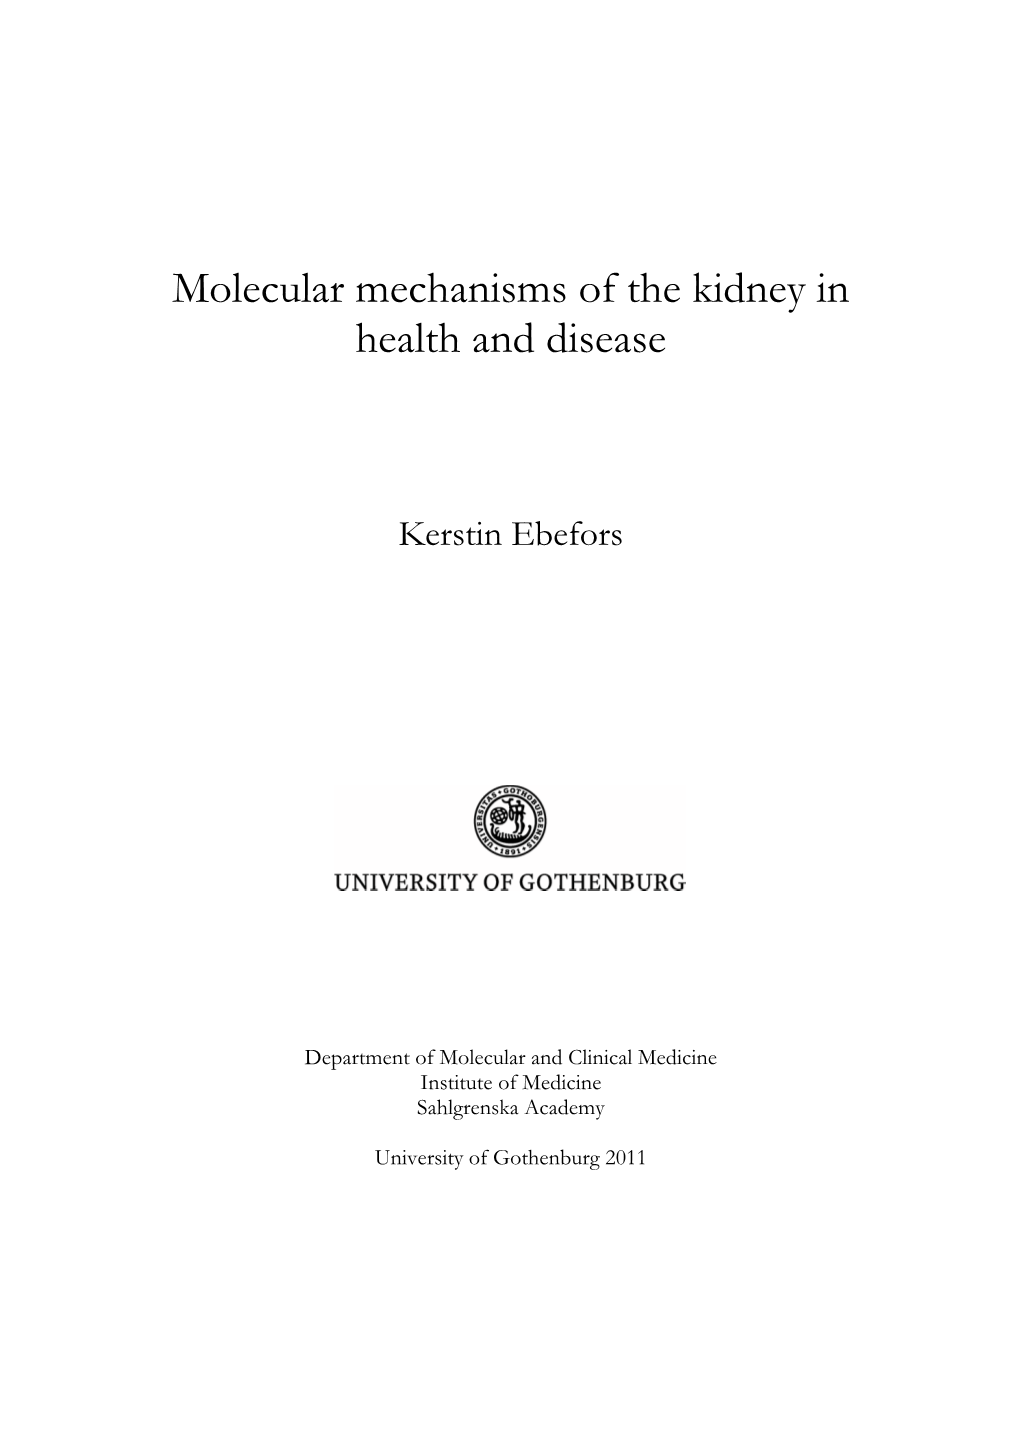 Molecular Mechanisms of the Kidney in Health and Disease